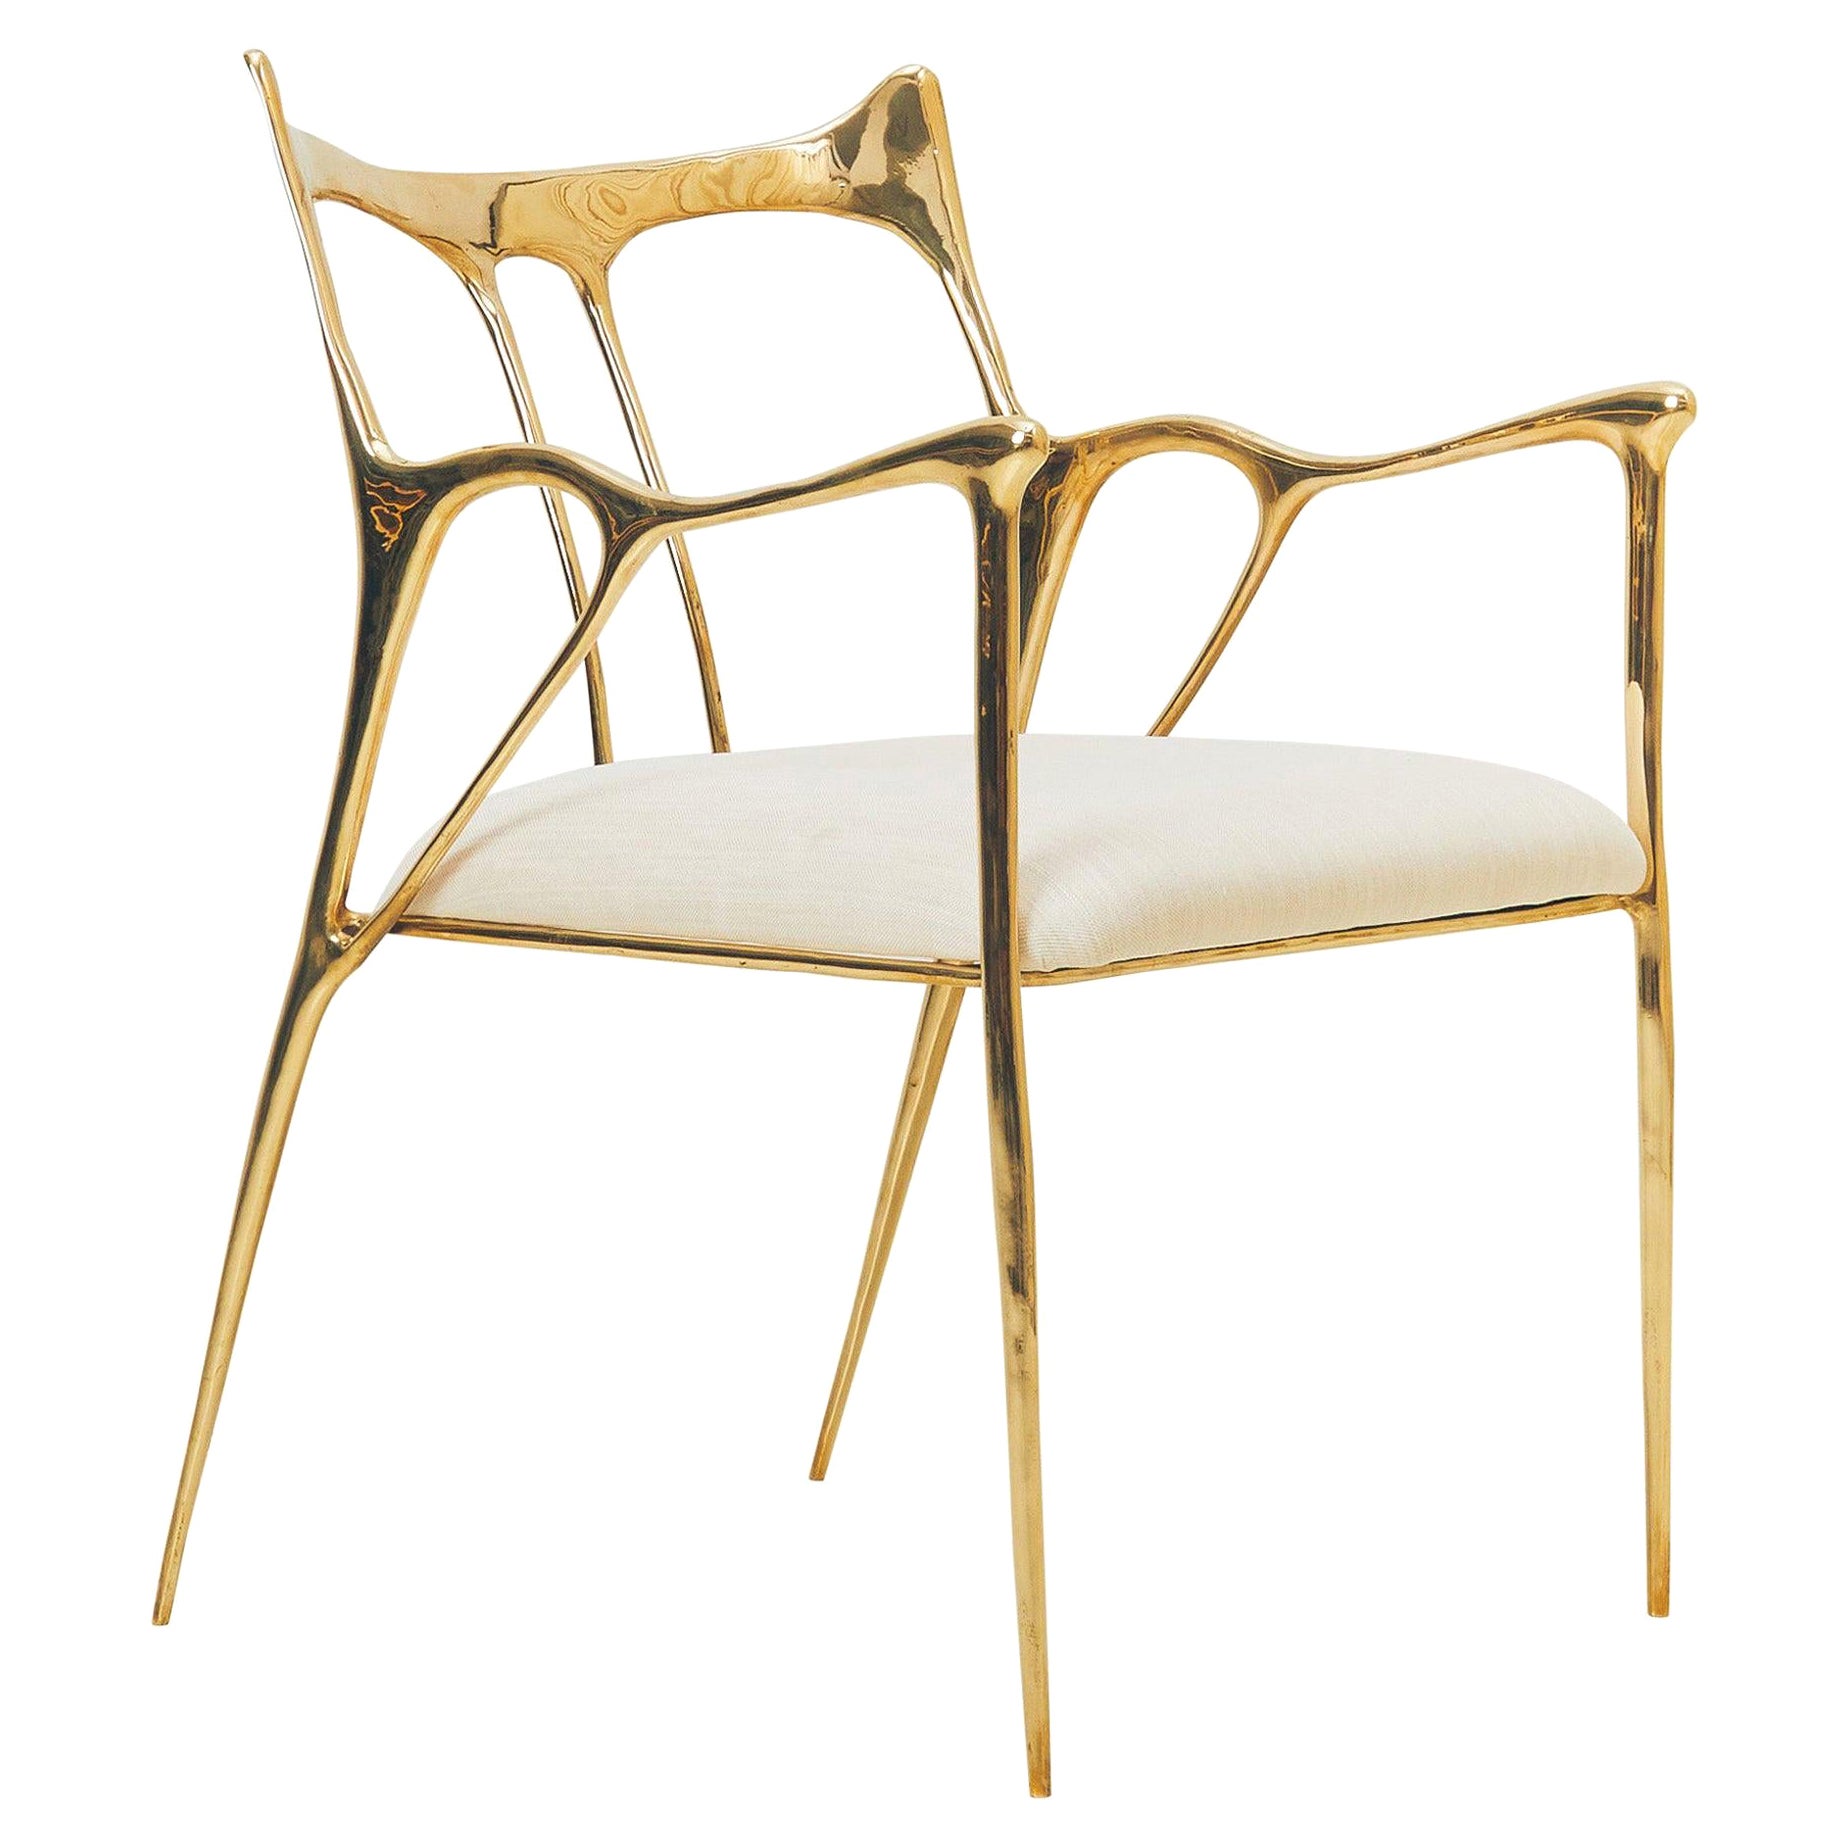 Calligraphic Sculpted Brass Chair by Misaya For Sale